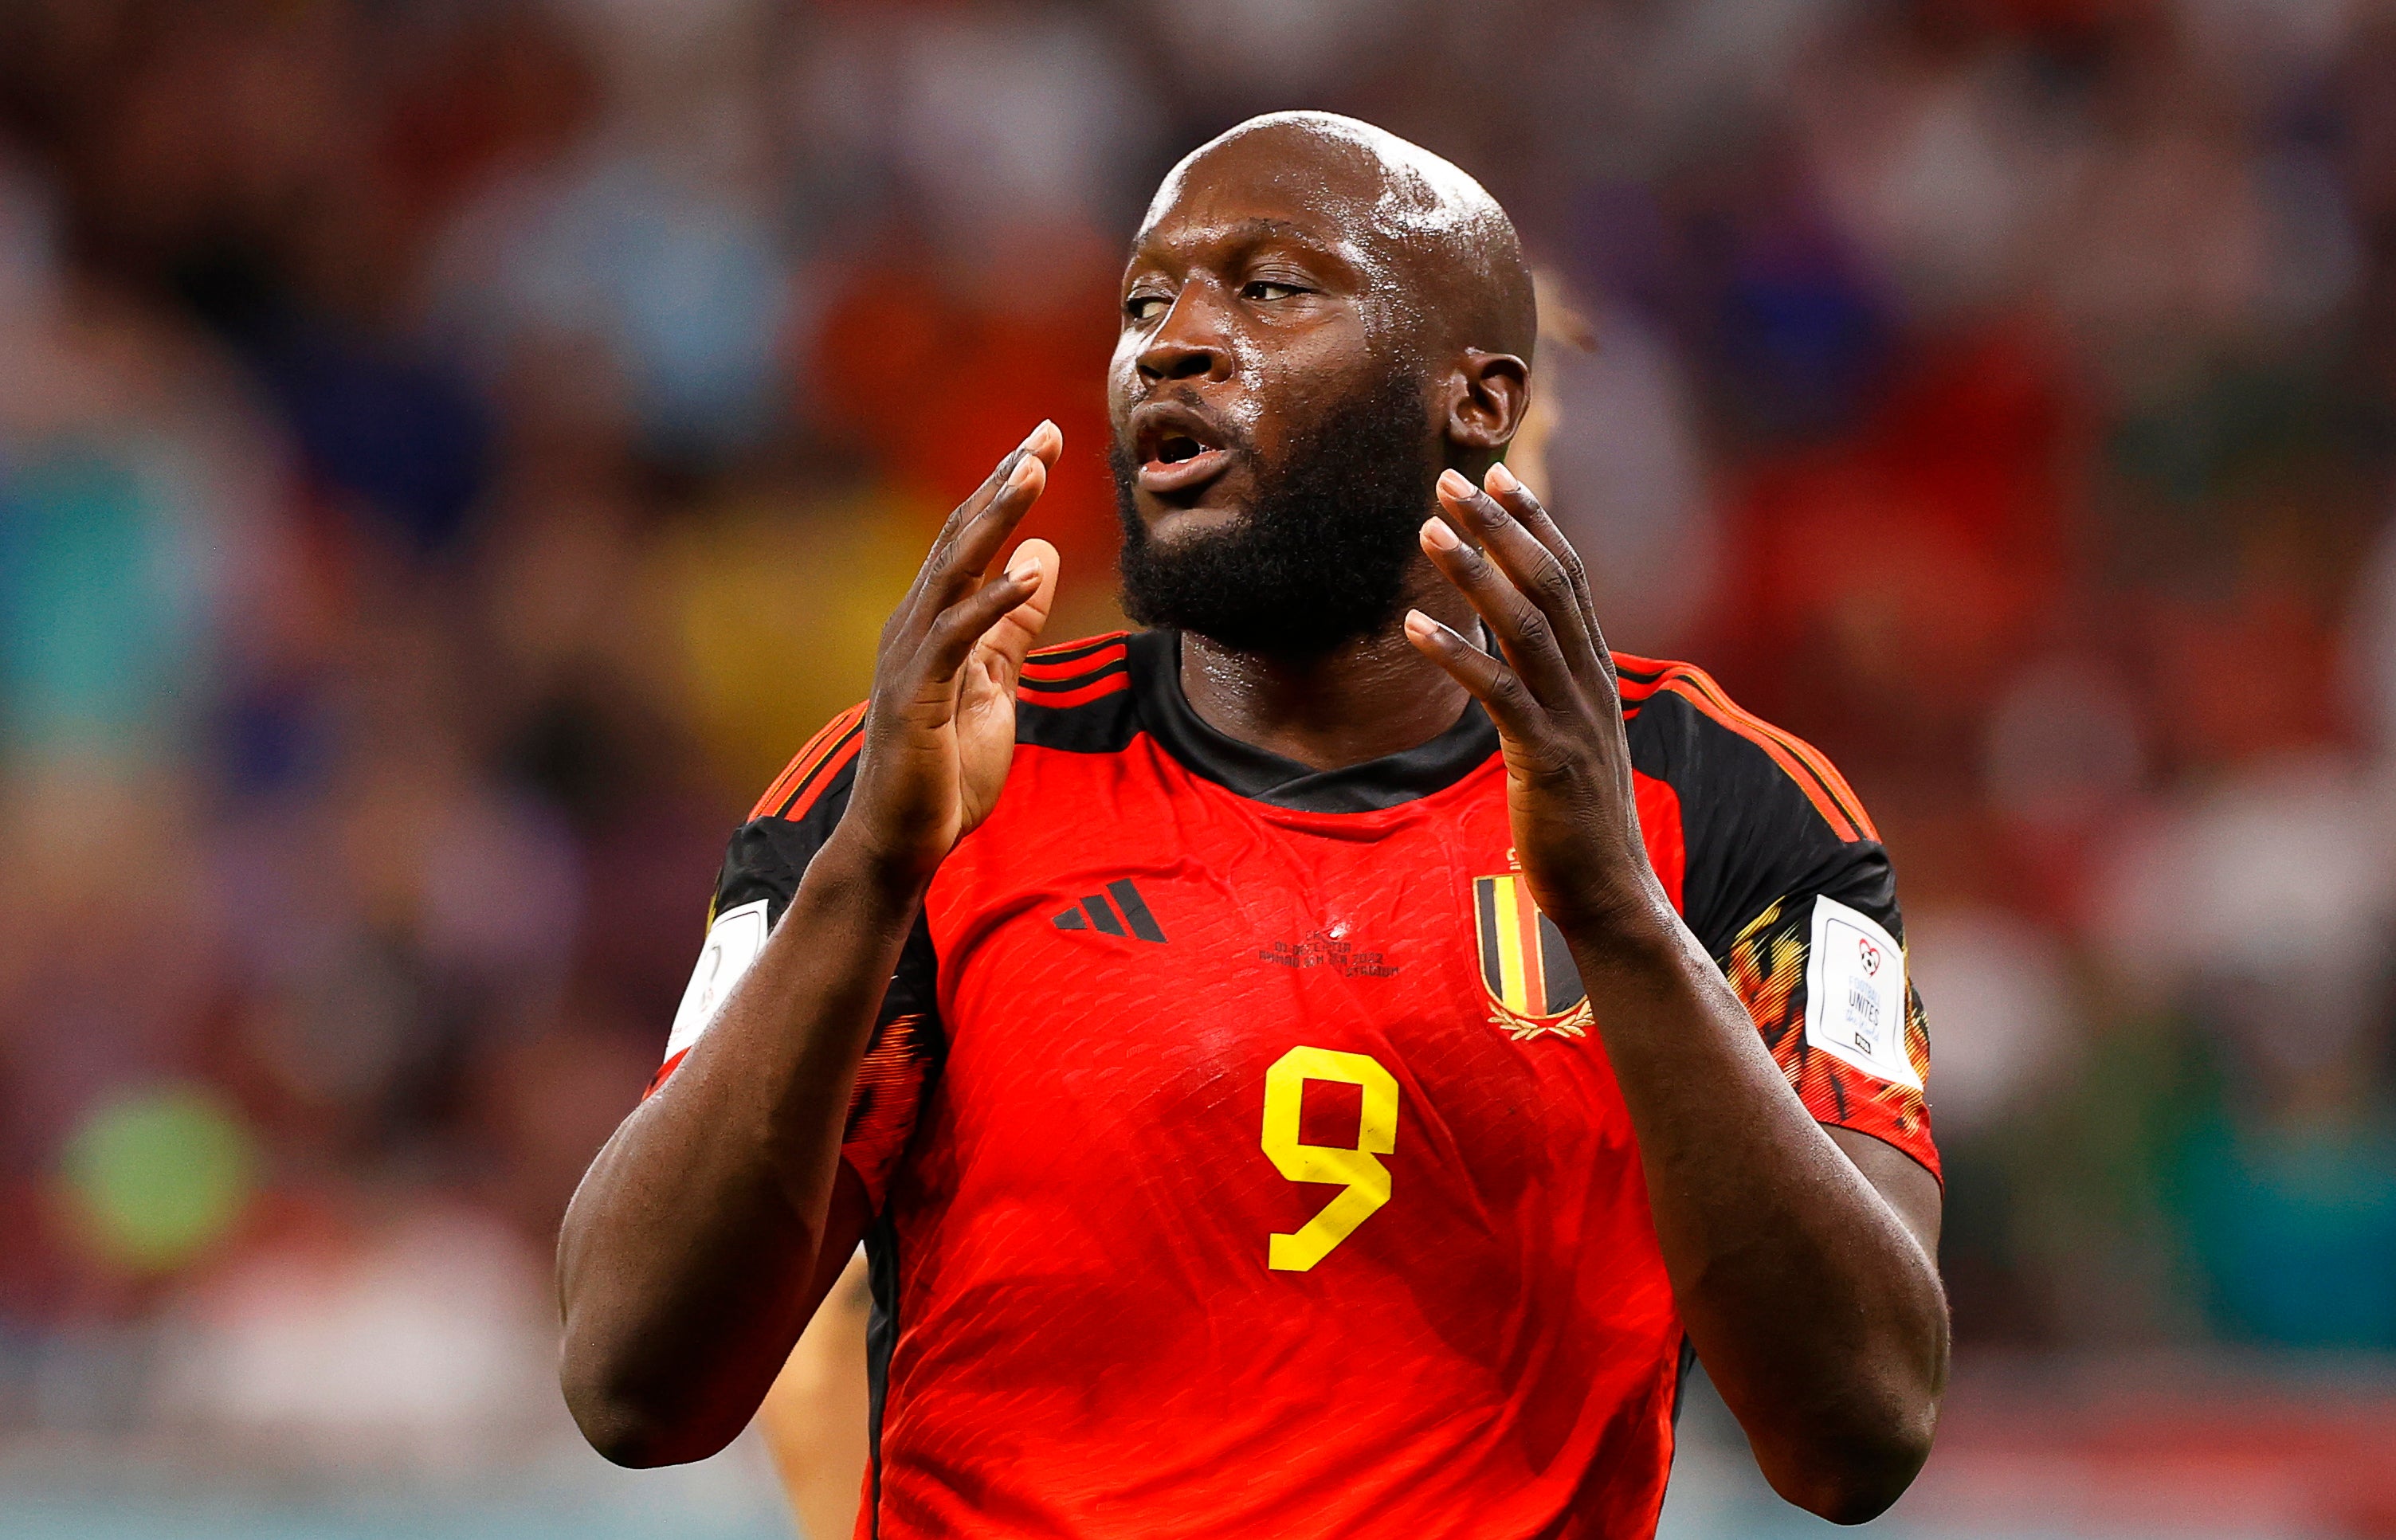 Romelu Lukaku reacts after missing a chance in the second half